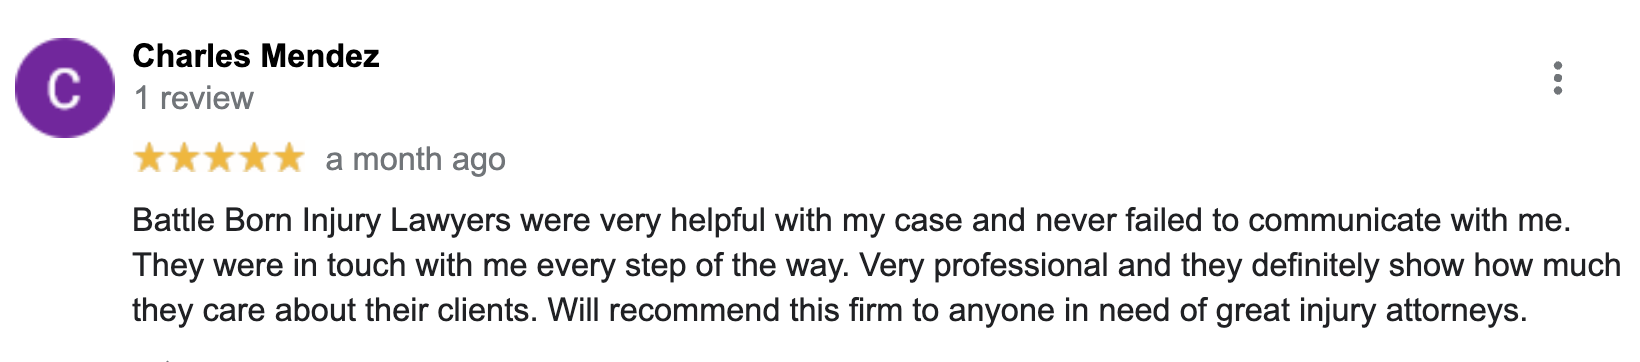 Accident and Injury Lawyer Client Review